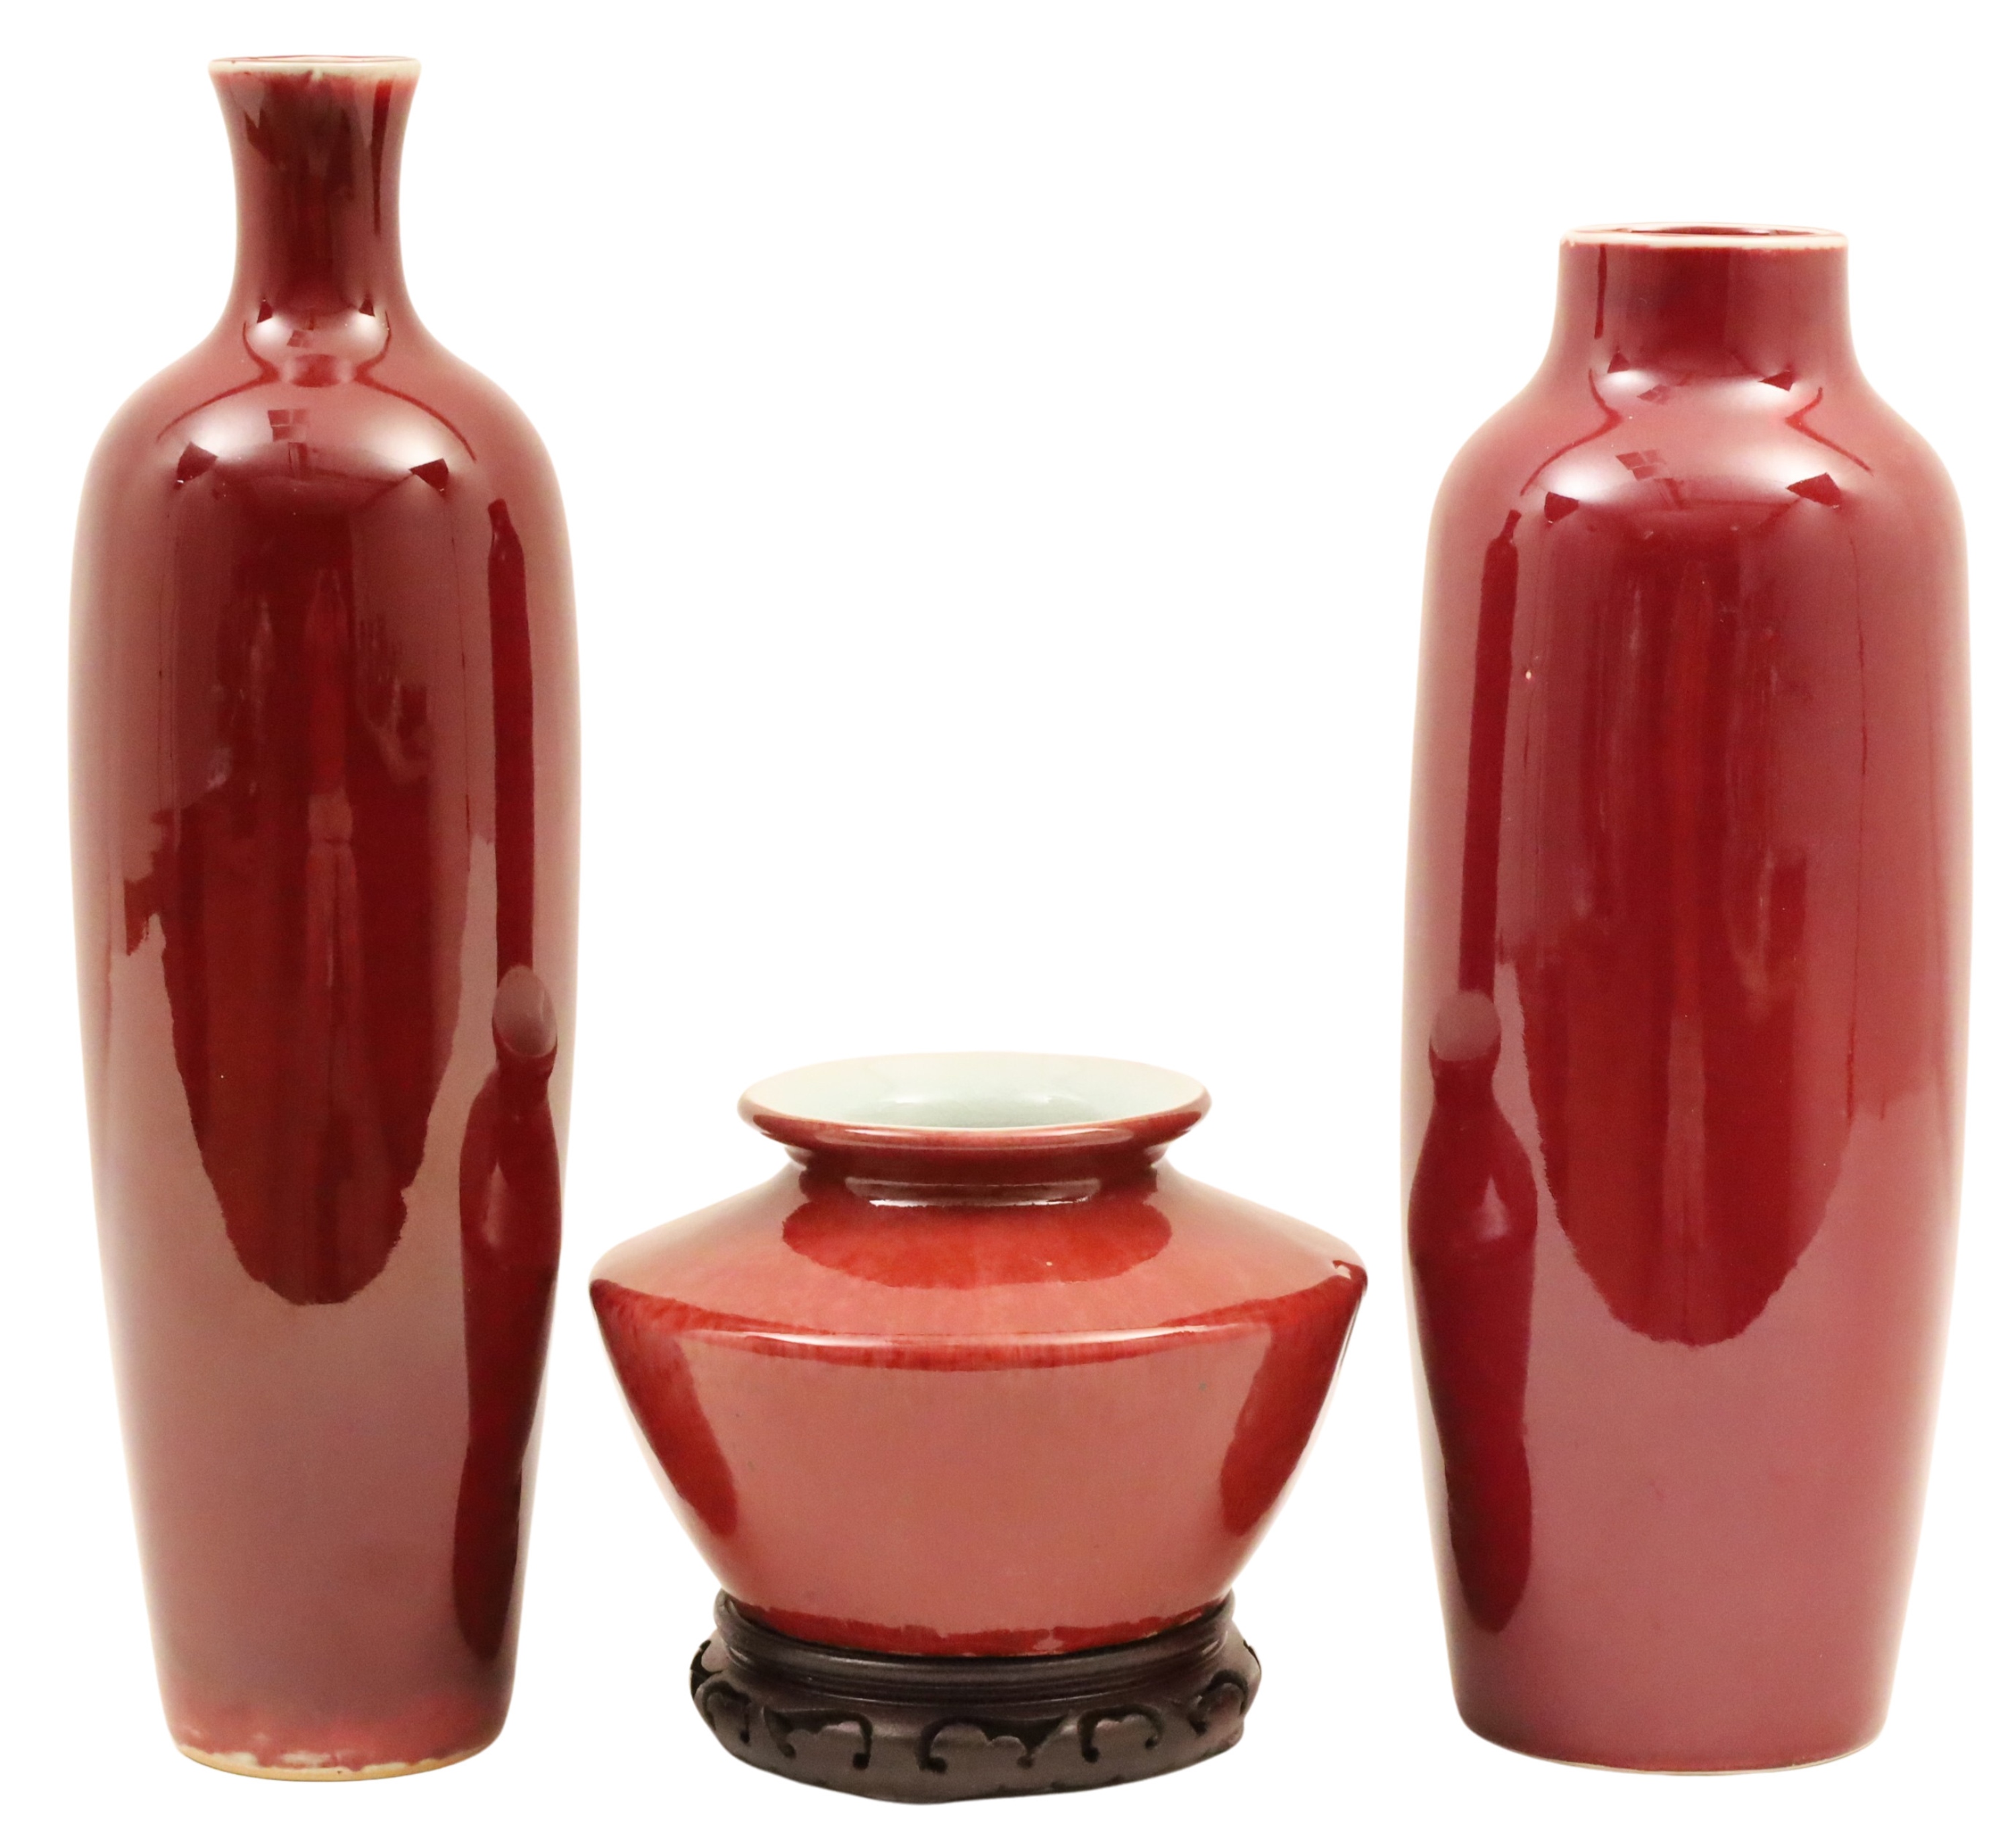 GROUP OF CHINESE FLAMBE VASES A 2f8eac